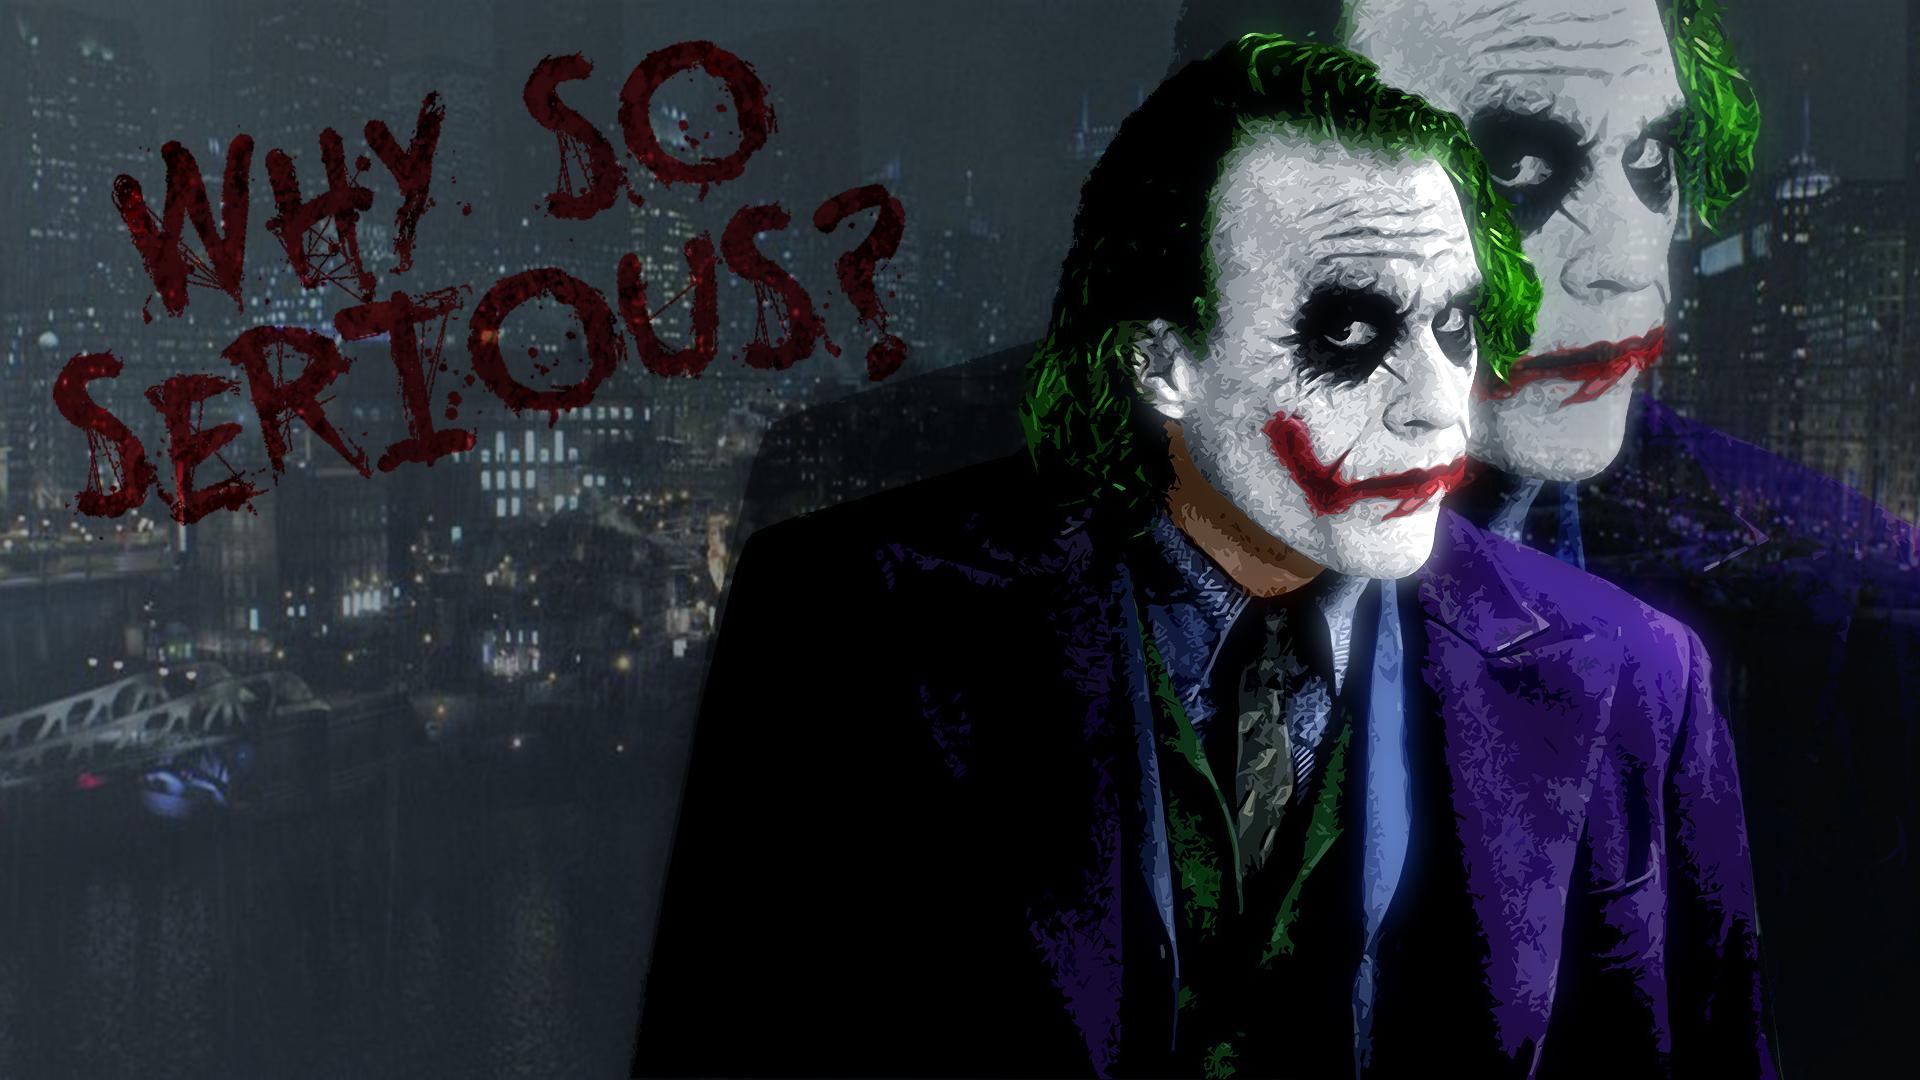 Download wallpaper for 720x1280 resolution | Joker Why So Serious Dark  Knight | movies and tv series | Wallpaper Better